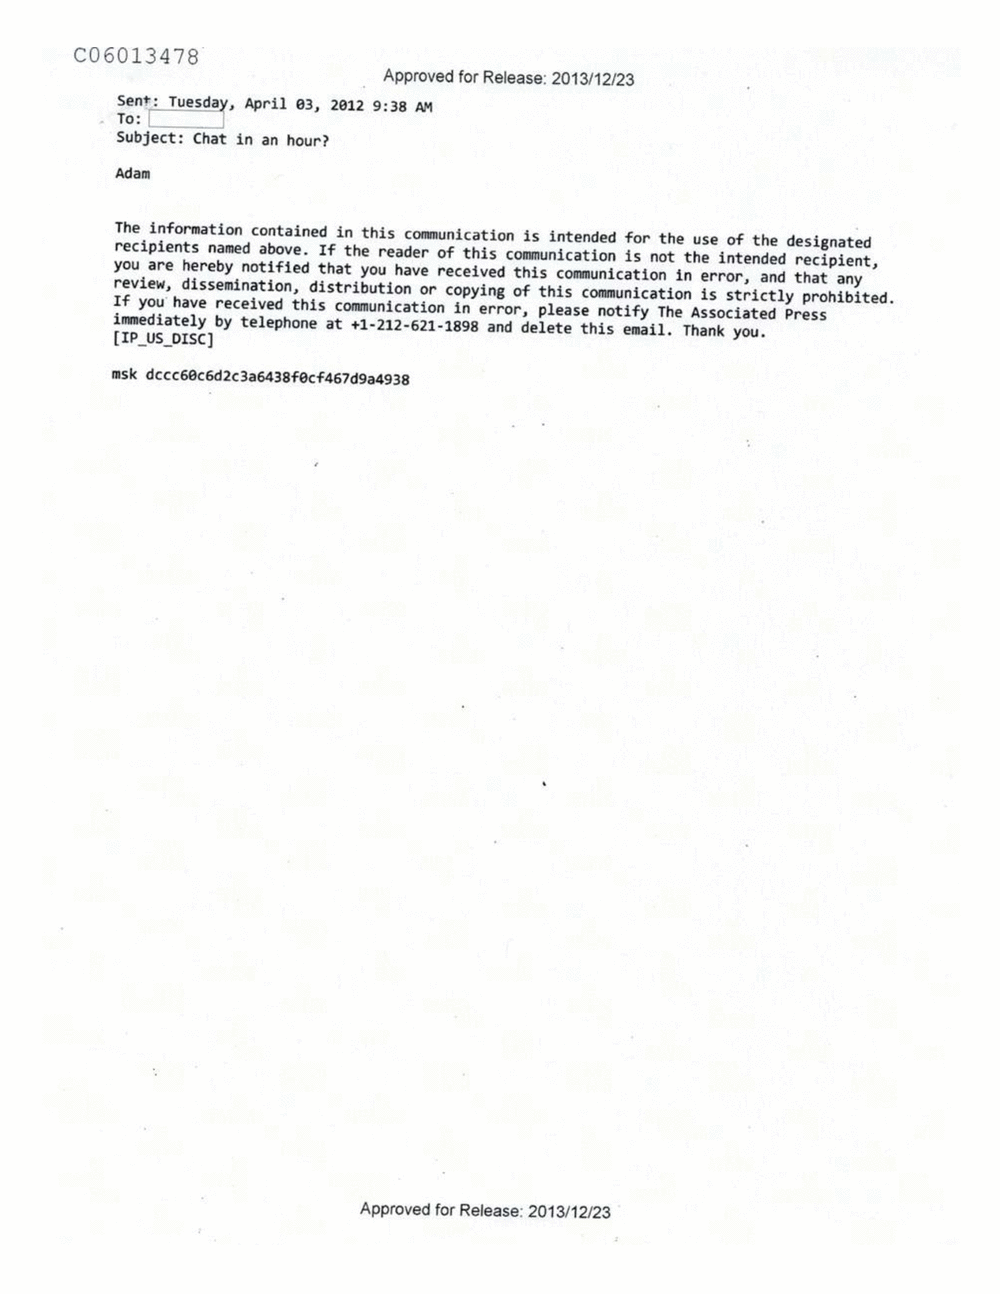 Page 328 from Email Correspondence Between Reporters and CIA Flacks